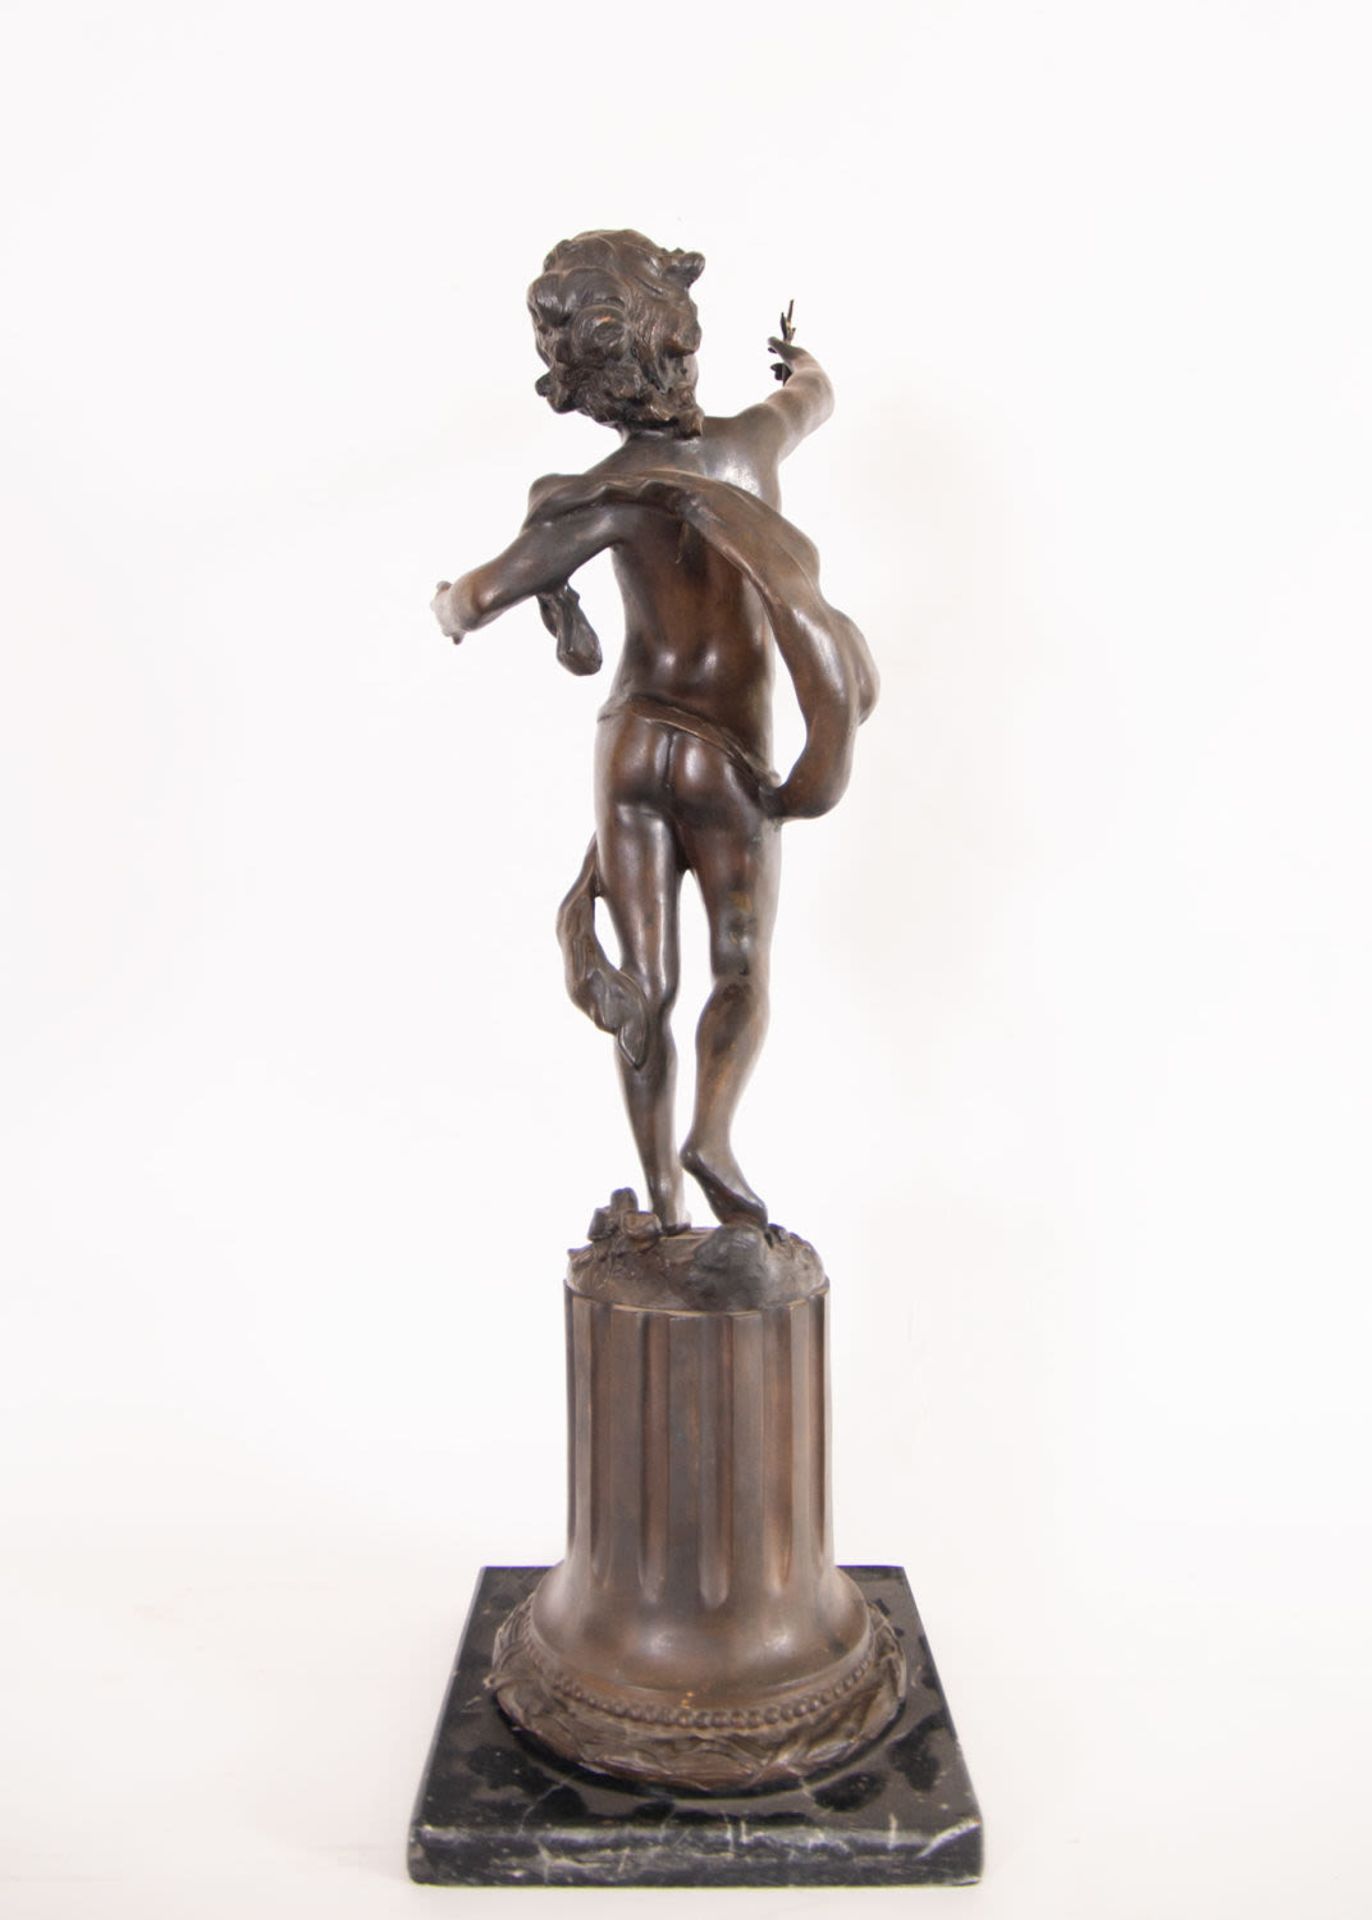 Pair of Important Cupids in Patinated Bronze, French School of the 19th Century - Image 5 of 8